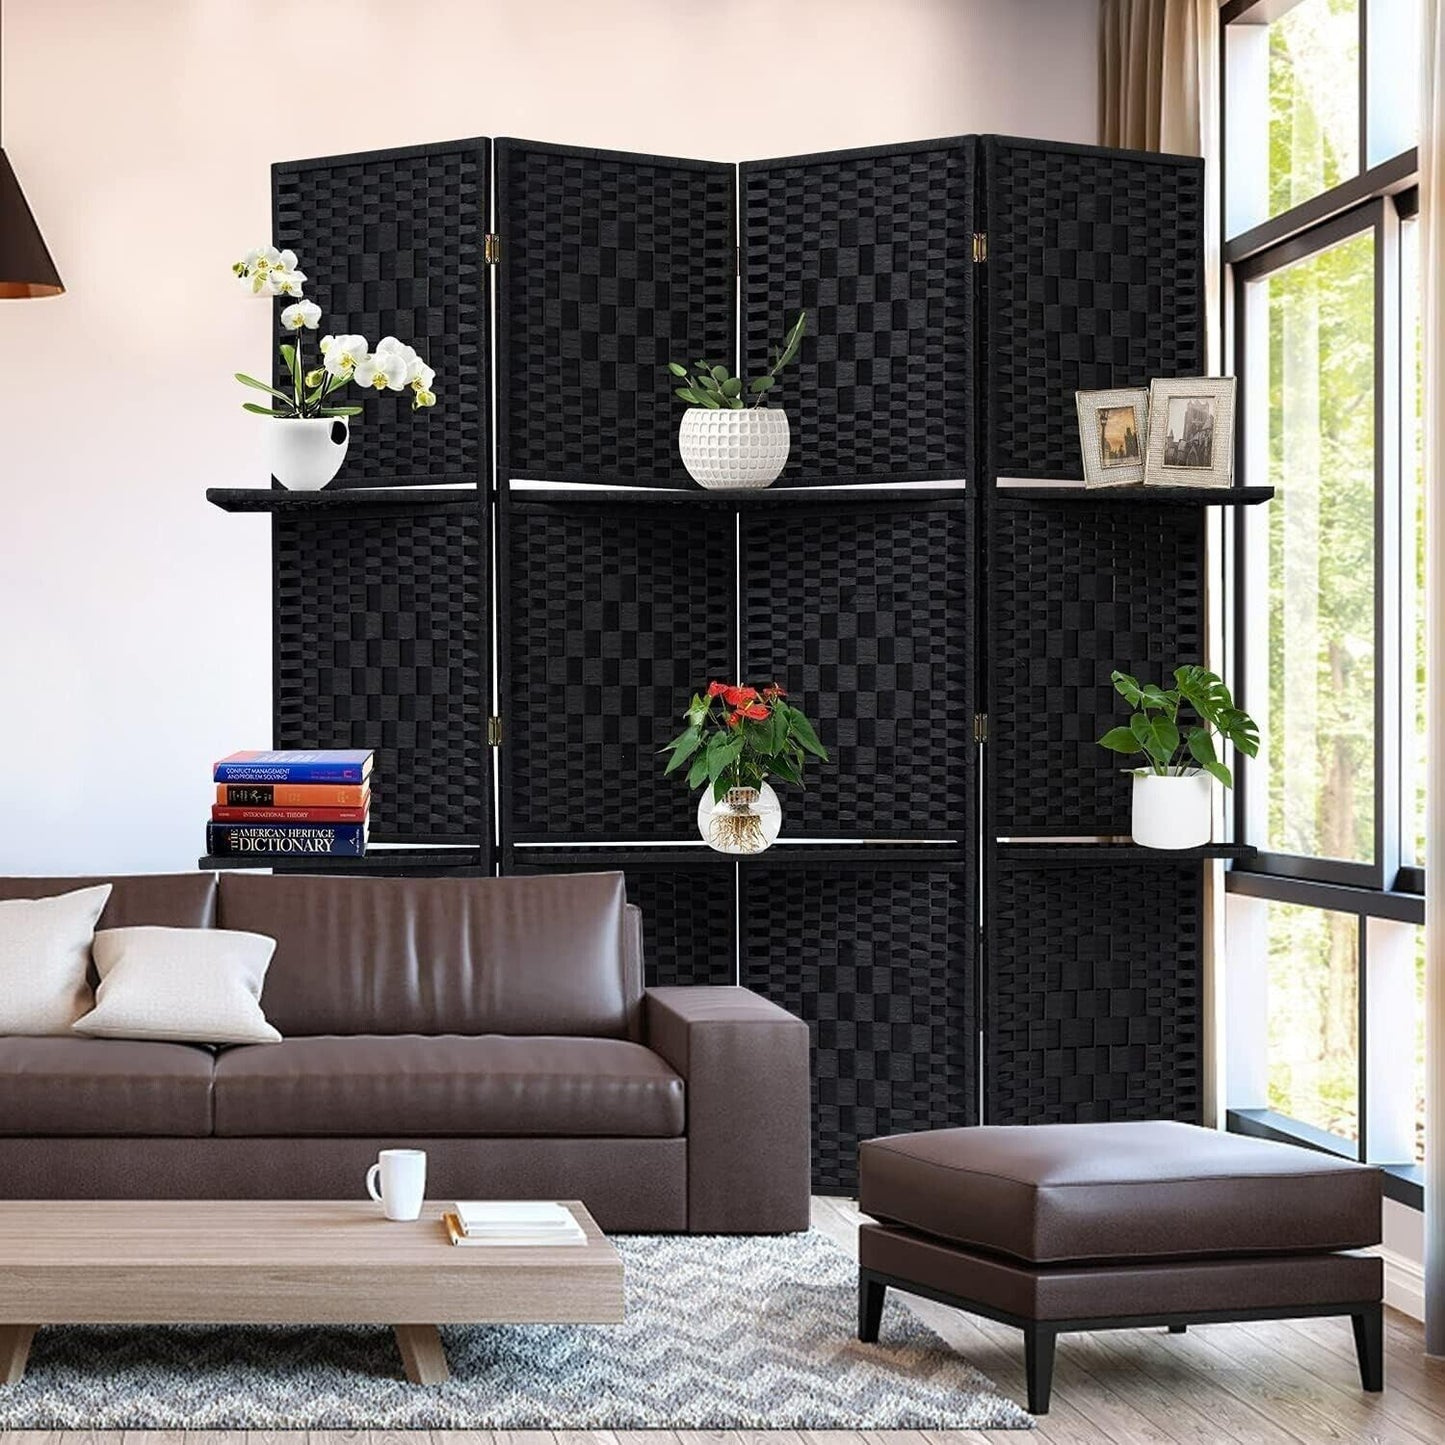 Black 4 Panel Room Divider Privacy Screen Partition Rattan